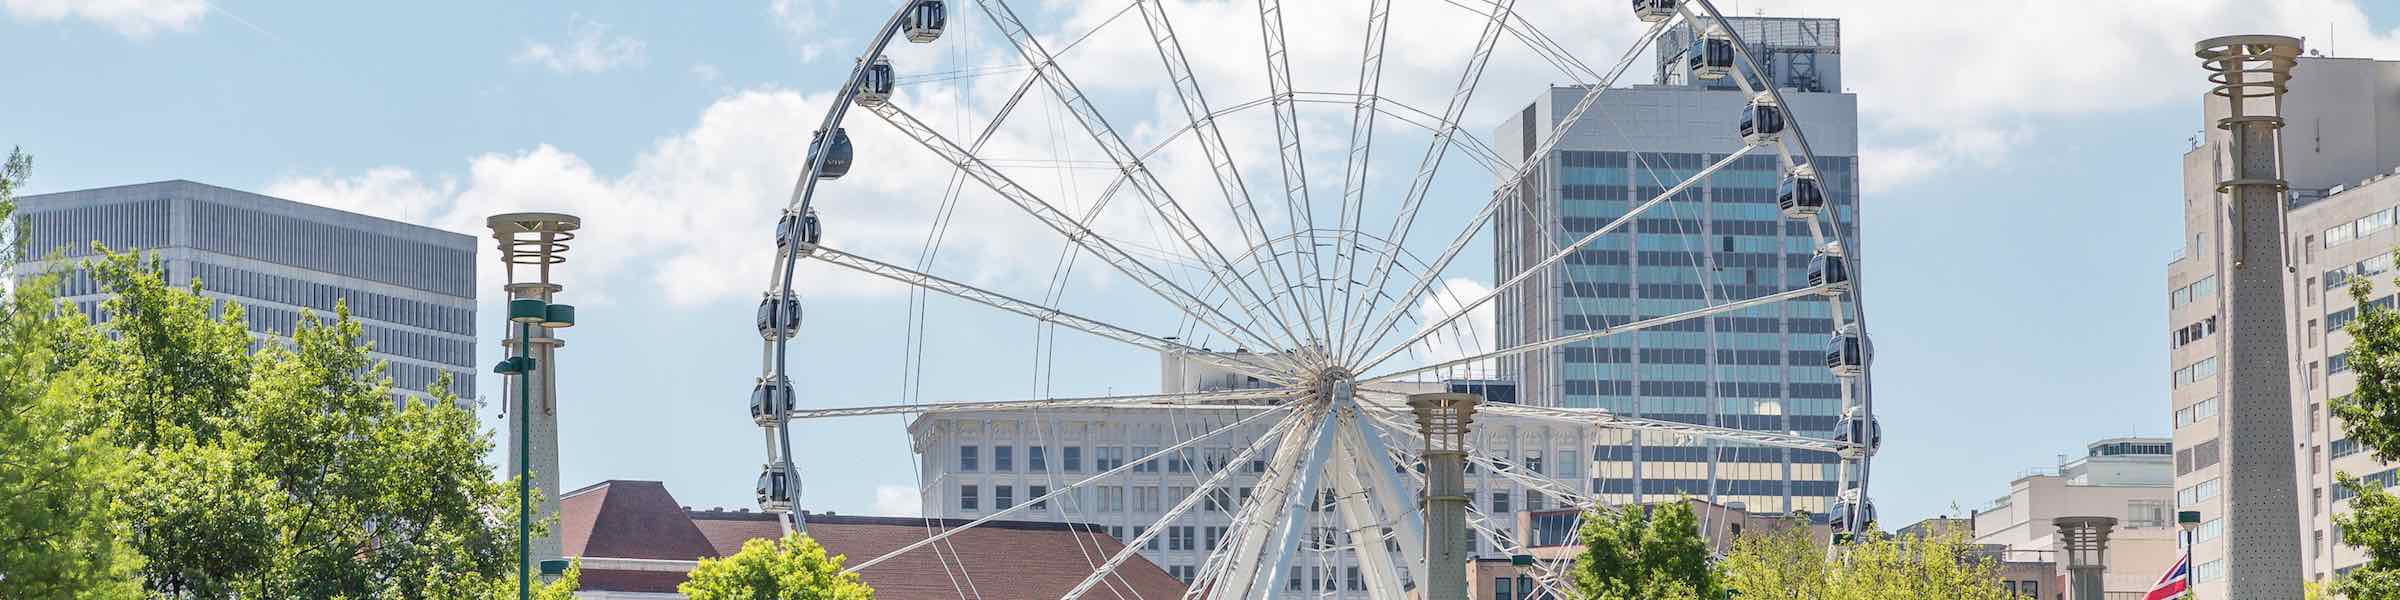 Centennial Olympic Park and the SkyView wheel in downtown Atlanta, GA.